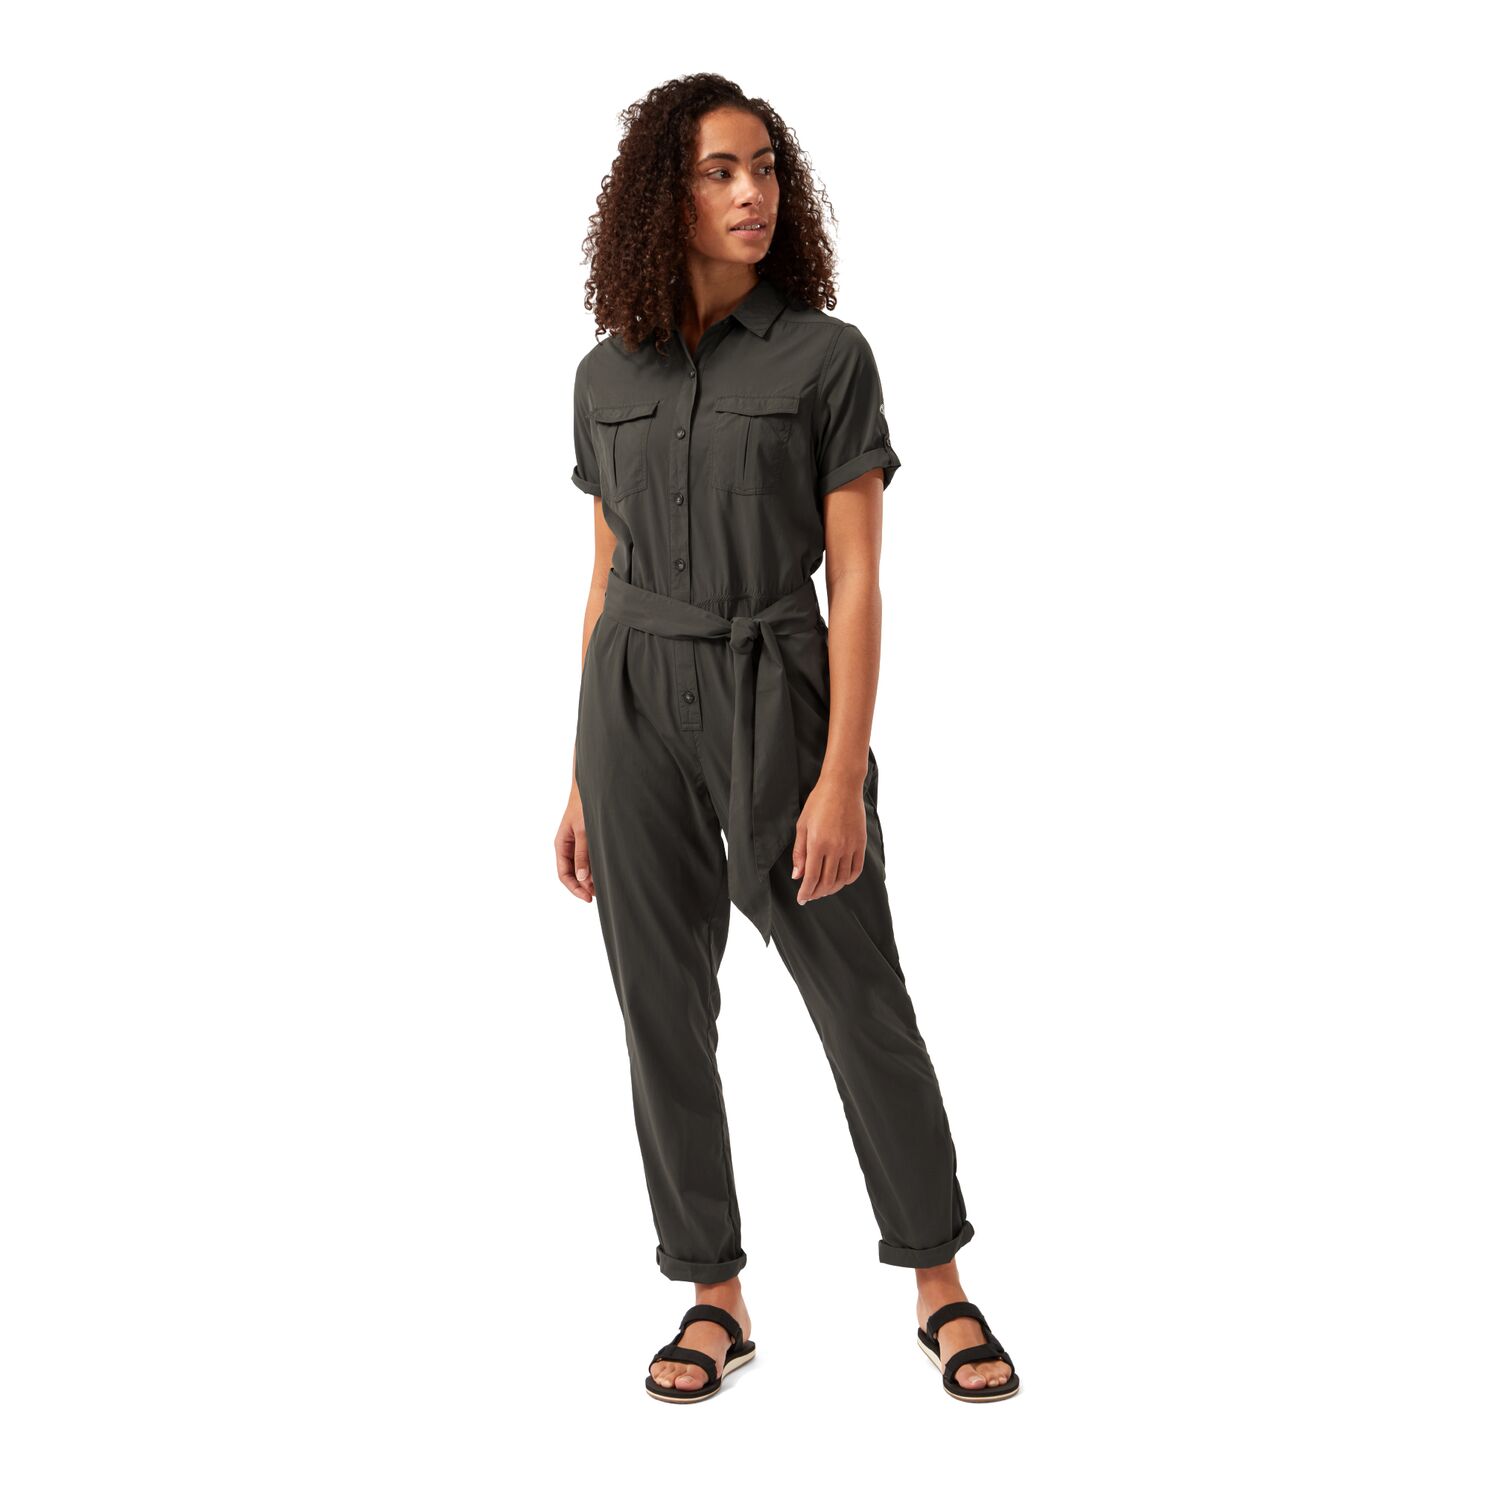 Craghoppers - UV Jumpsuit for women - NosiLife Rania - Woodland Green